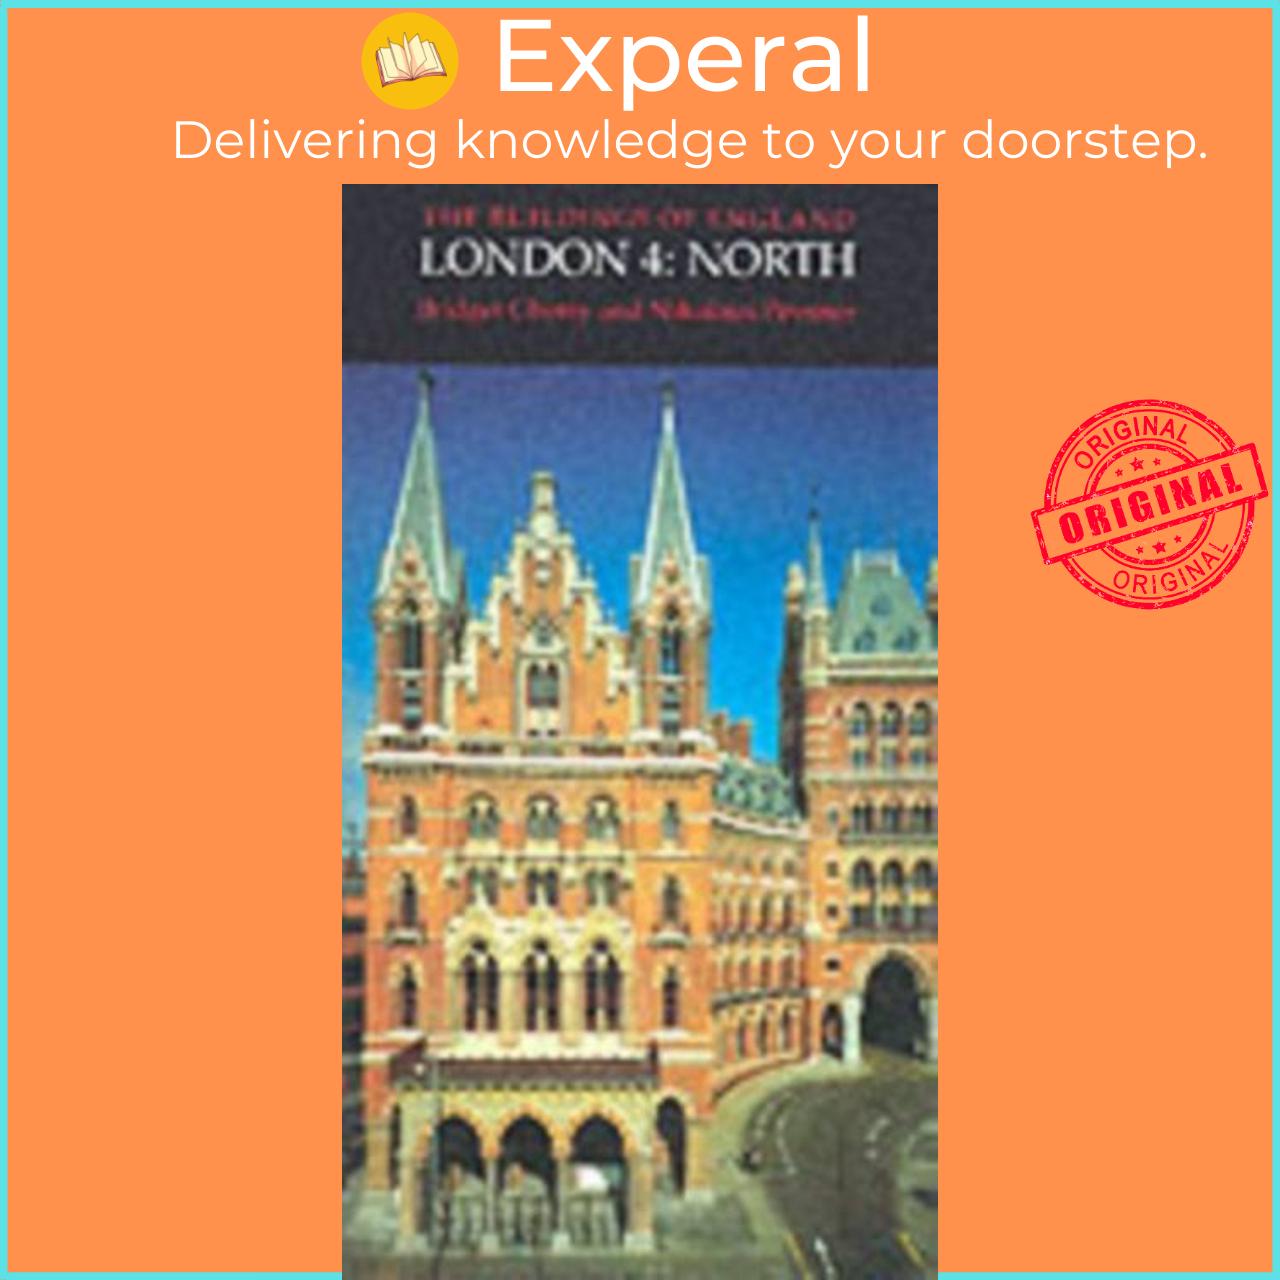 Sách - London 4: North by Nikolaus Pevsner (UK edition, hardcover)